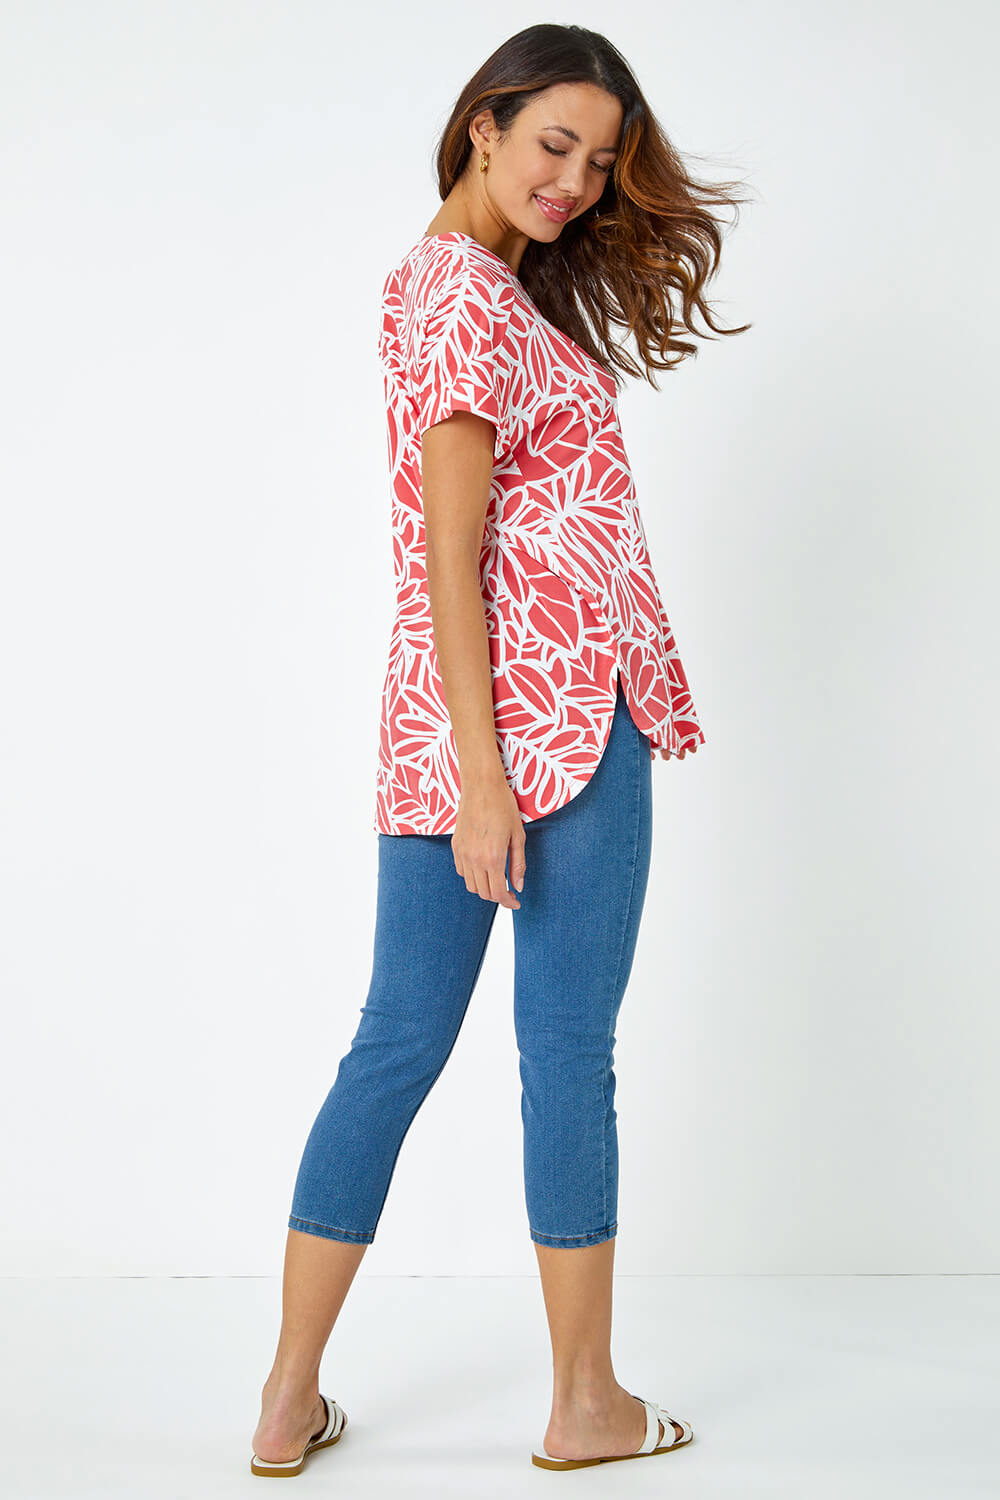 PINK Linear Floral Print Pleat Front Top, Image 2 of 5